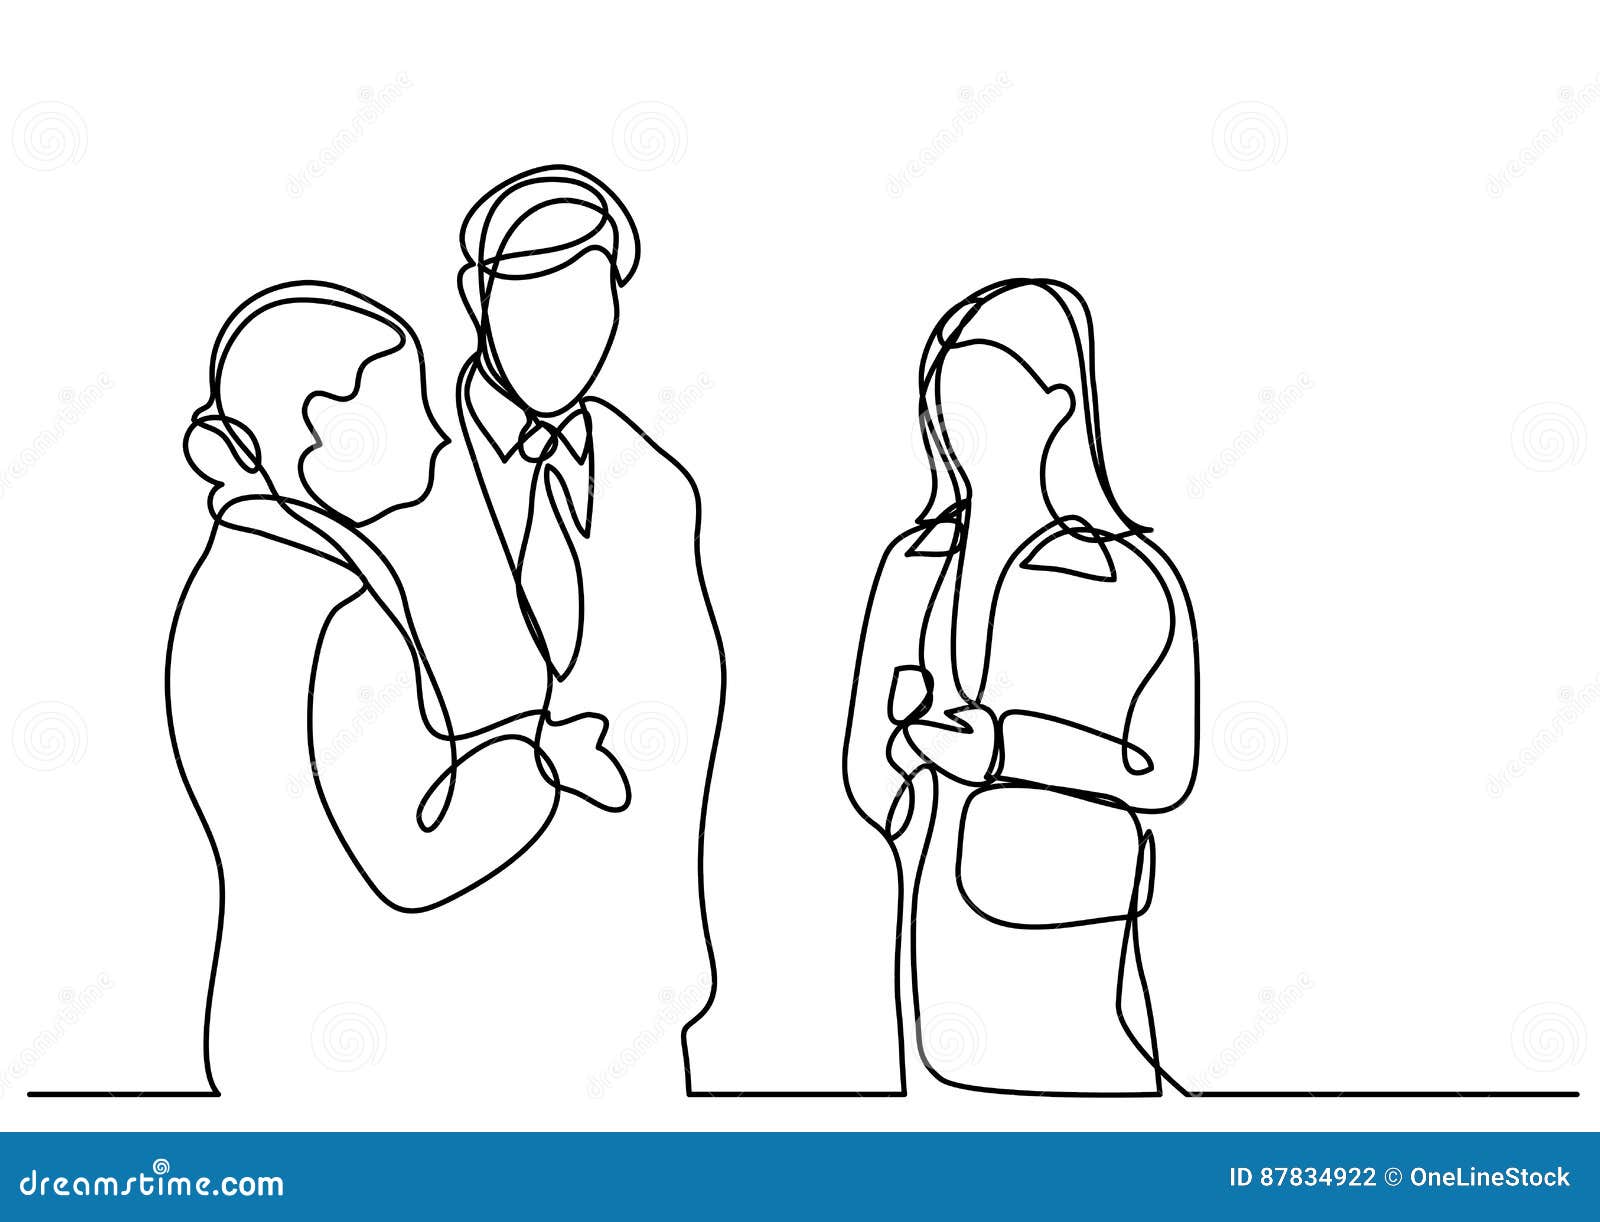 Back Group Of People Talking In Pairs As Part Of Active - Line Art -  1024x768 PNG Download - PNGkit